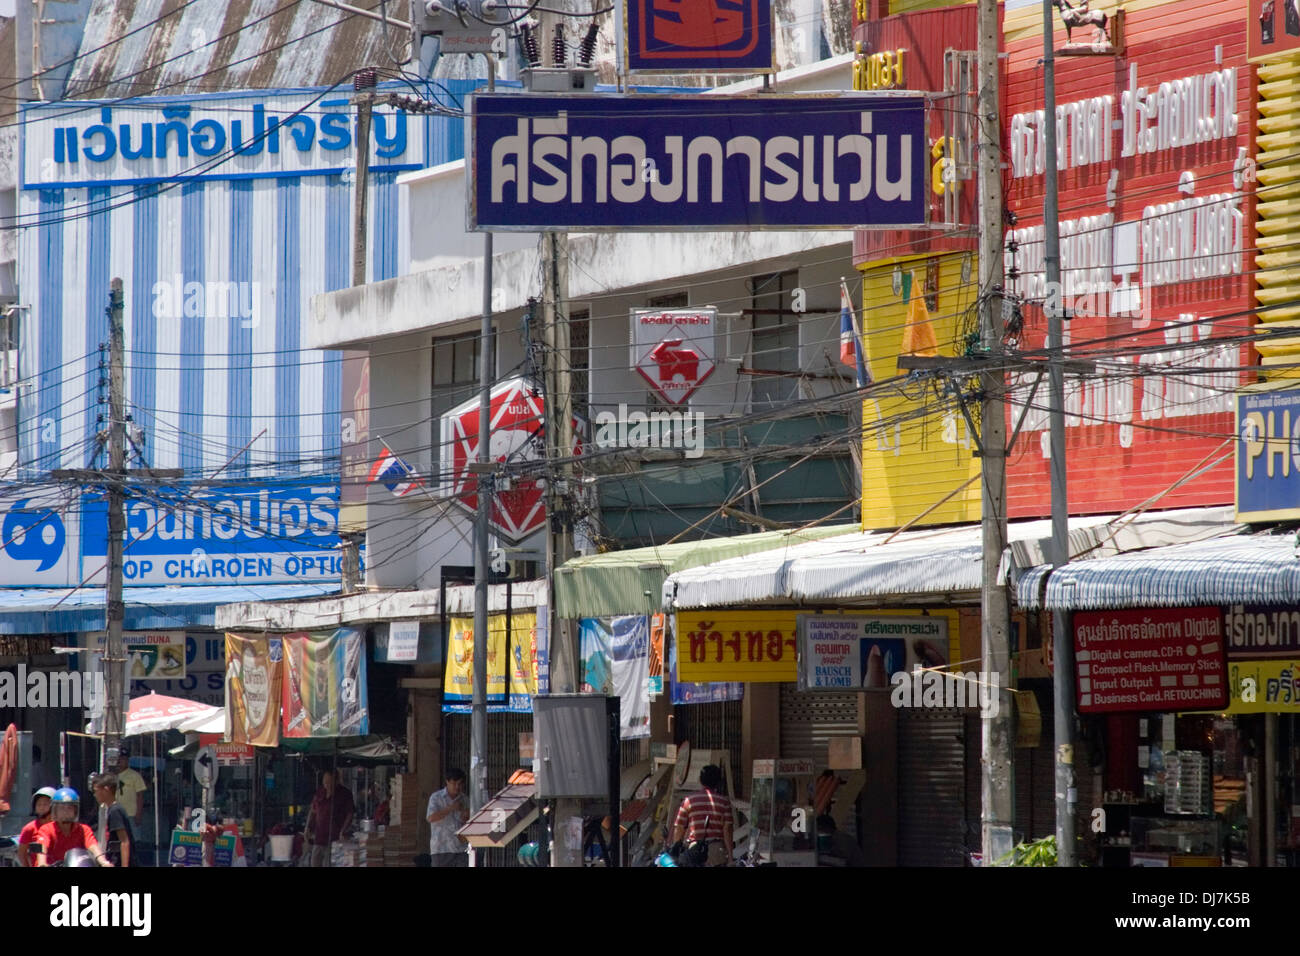 Many signs written in Thai are part of the urban landscape above a city street in Khon Kaen, Thailand. Stock Photo